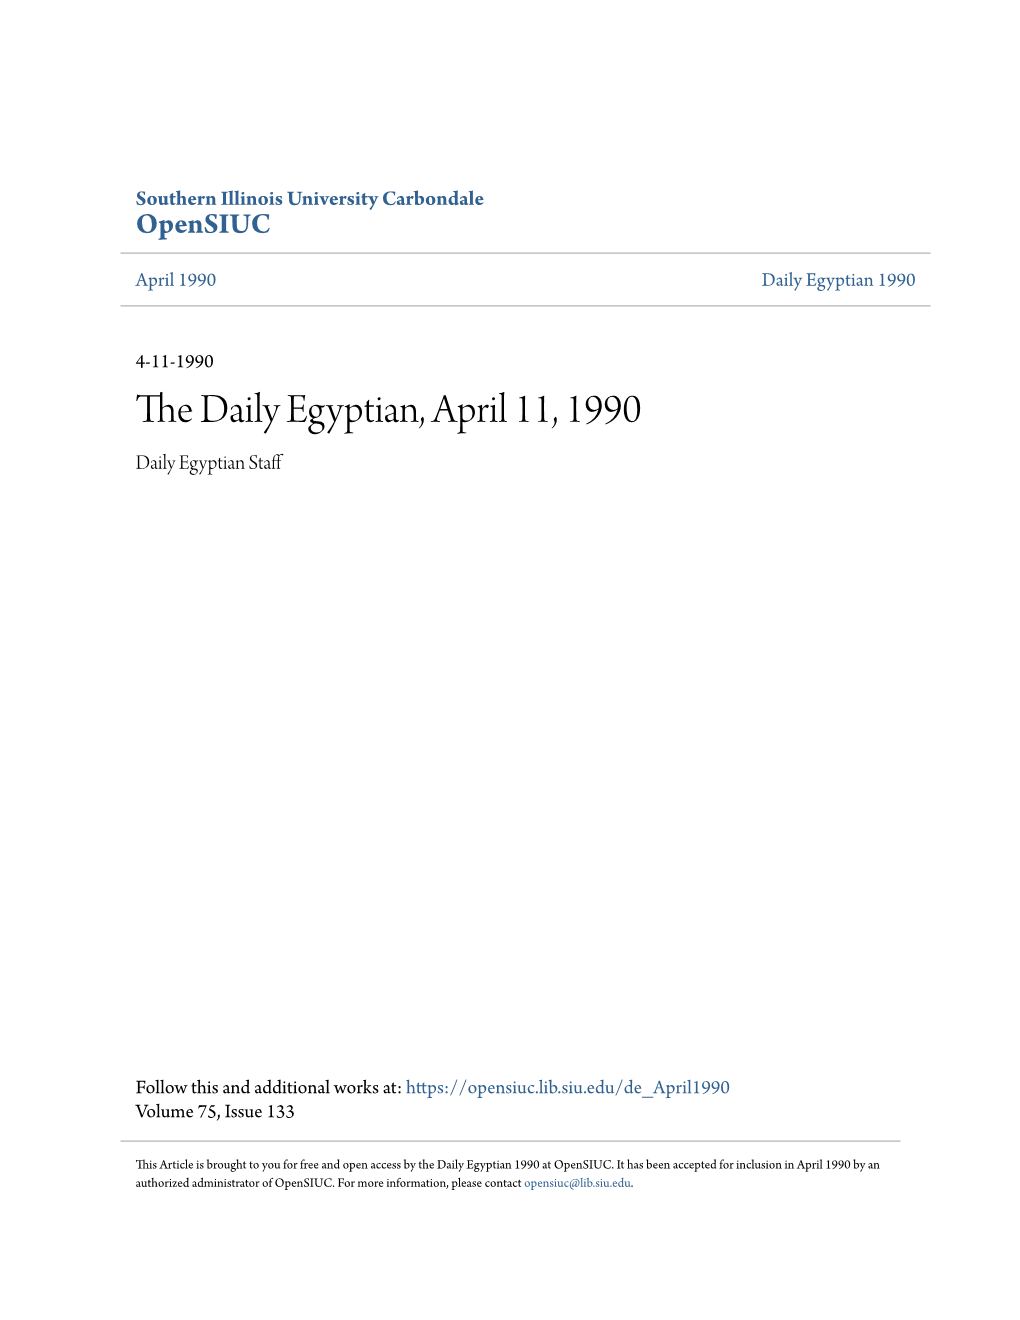 The Daily Egyptian, April 11, 1990